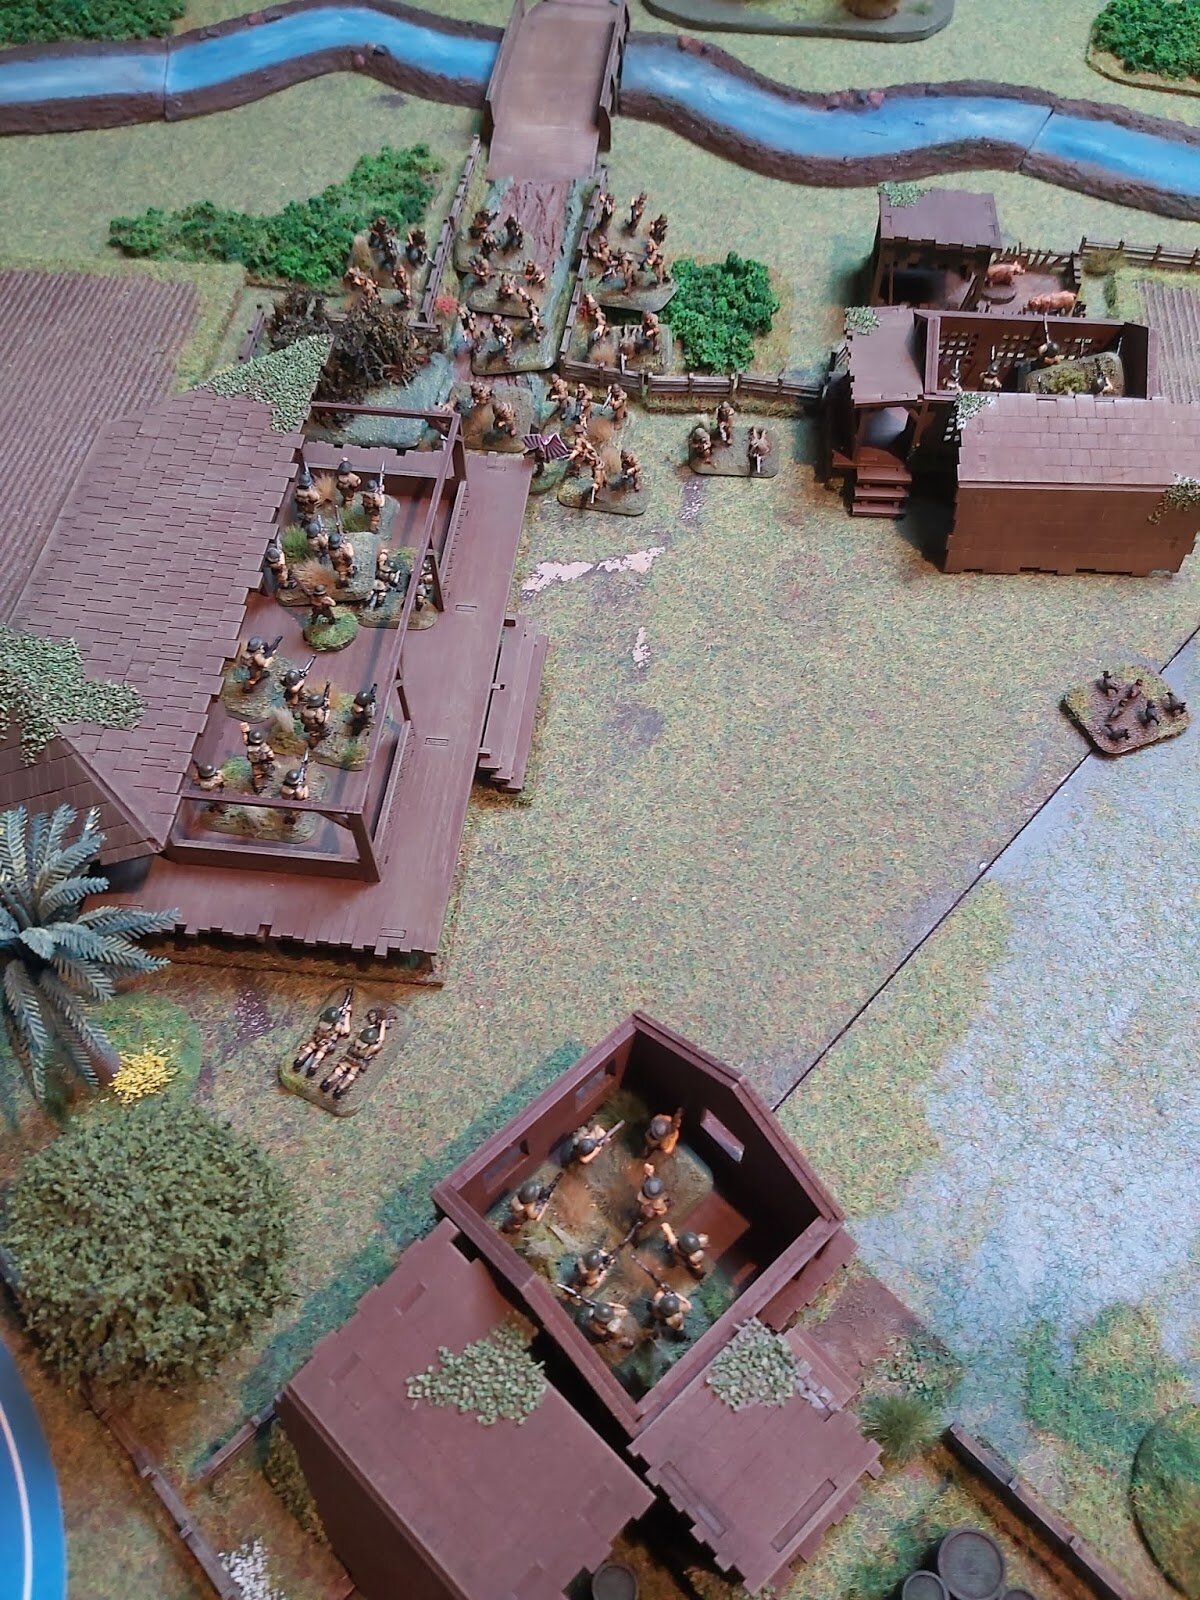 Immediately the Japanese infantry fell on the British defenders in the village buildings. 